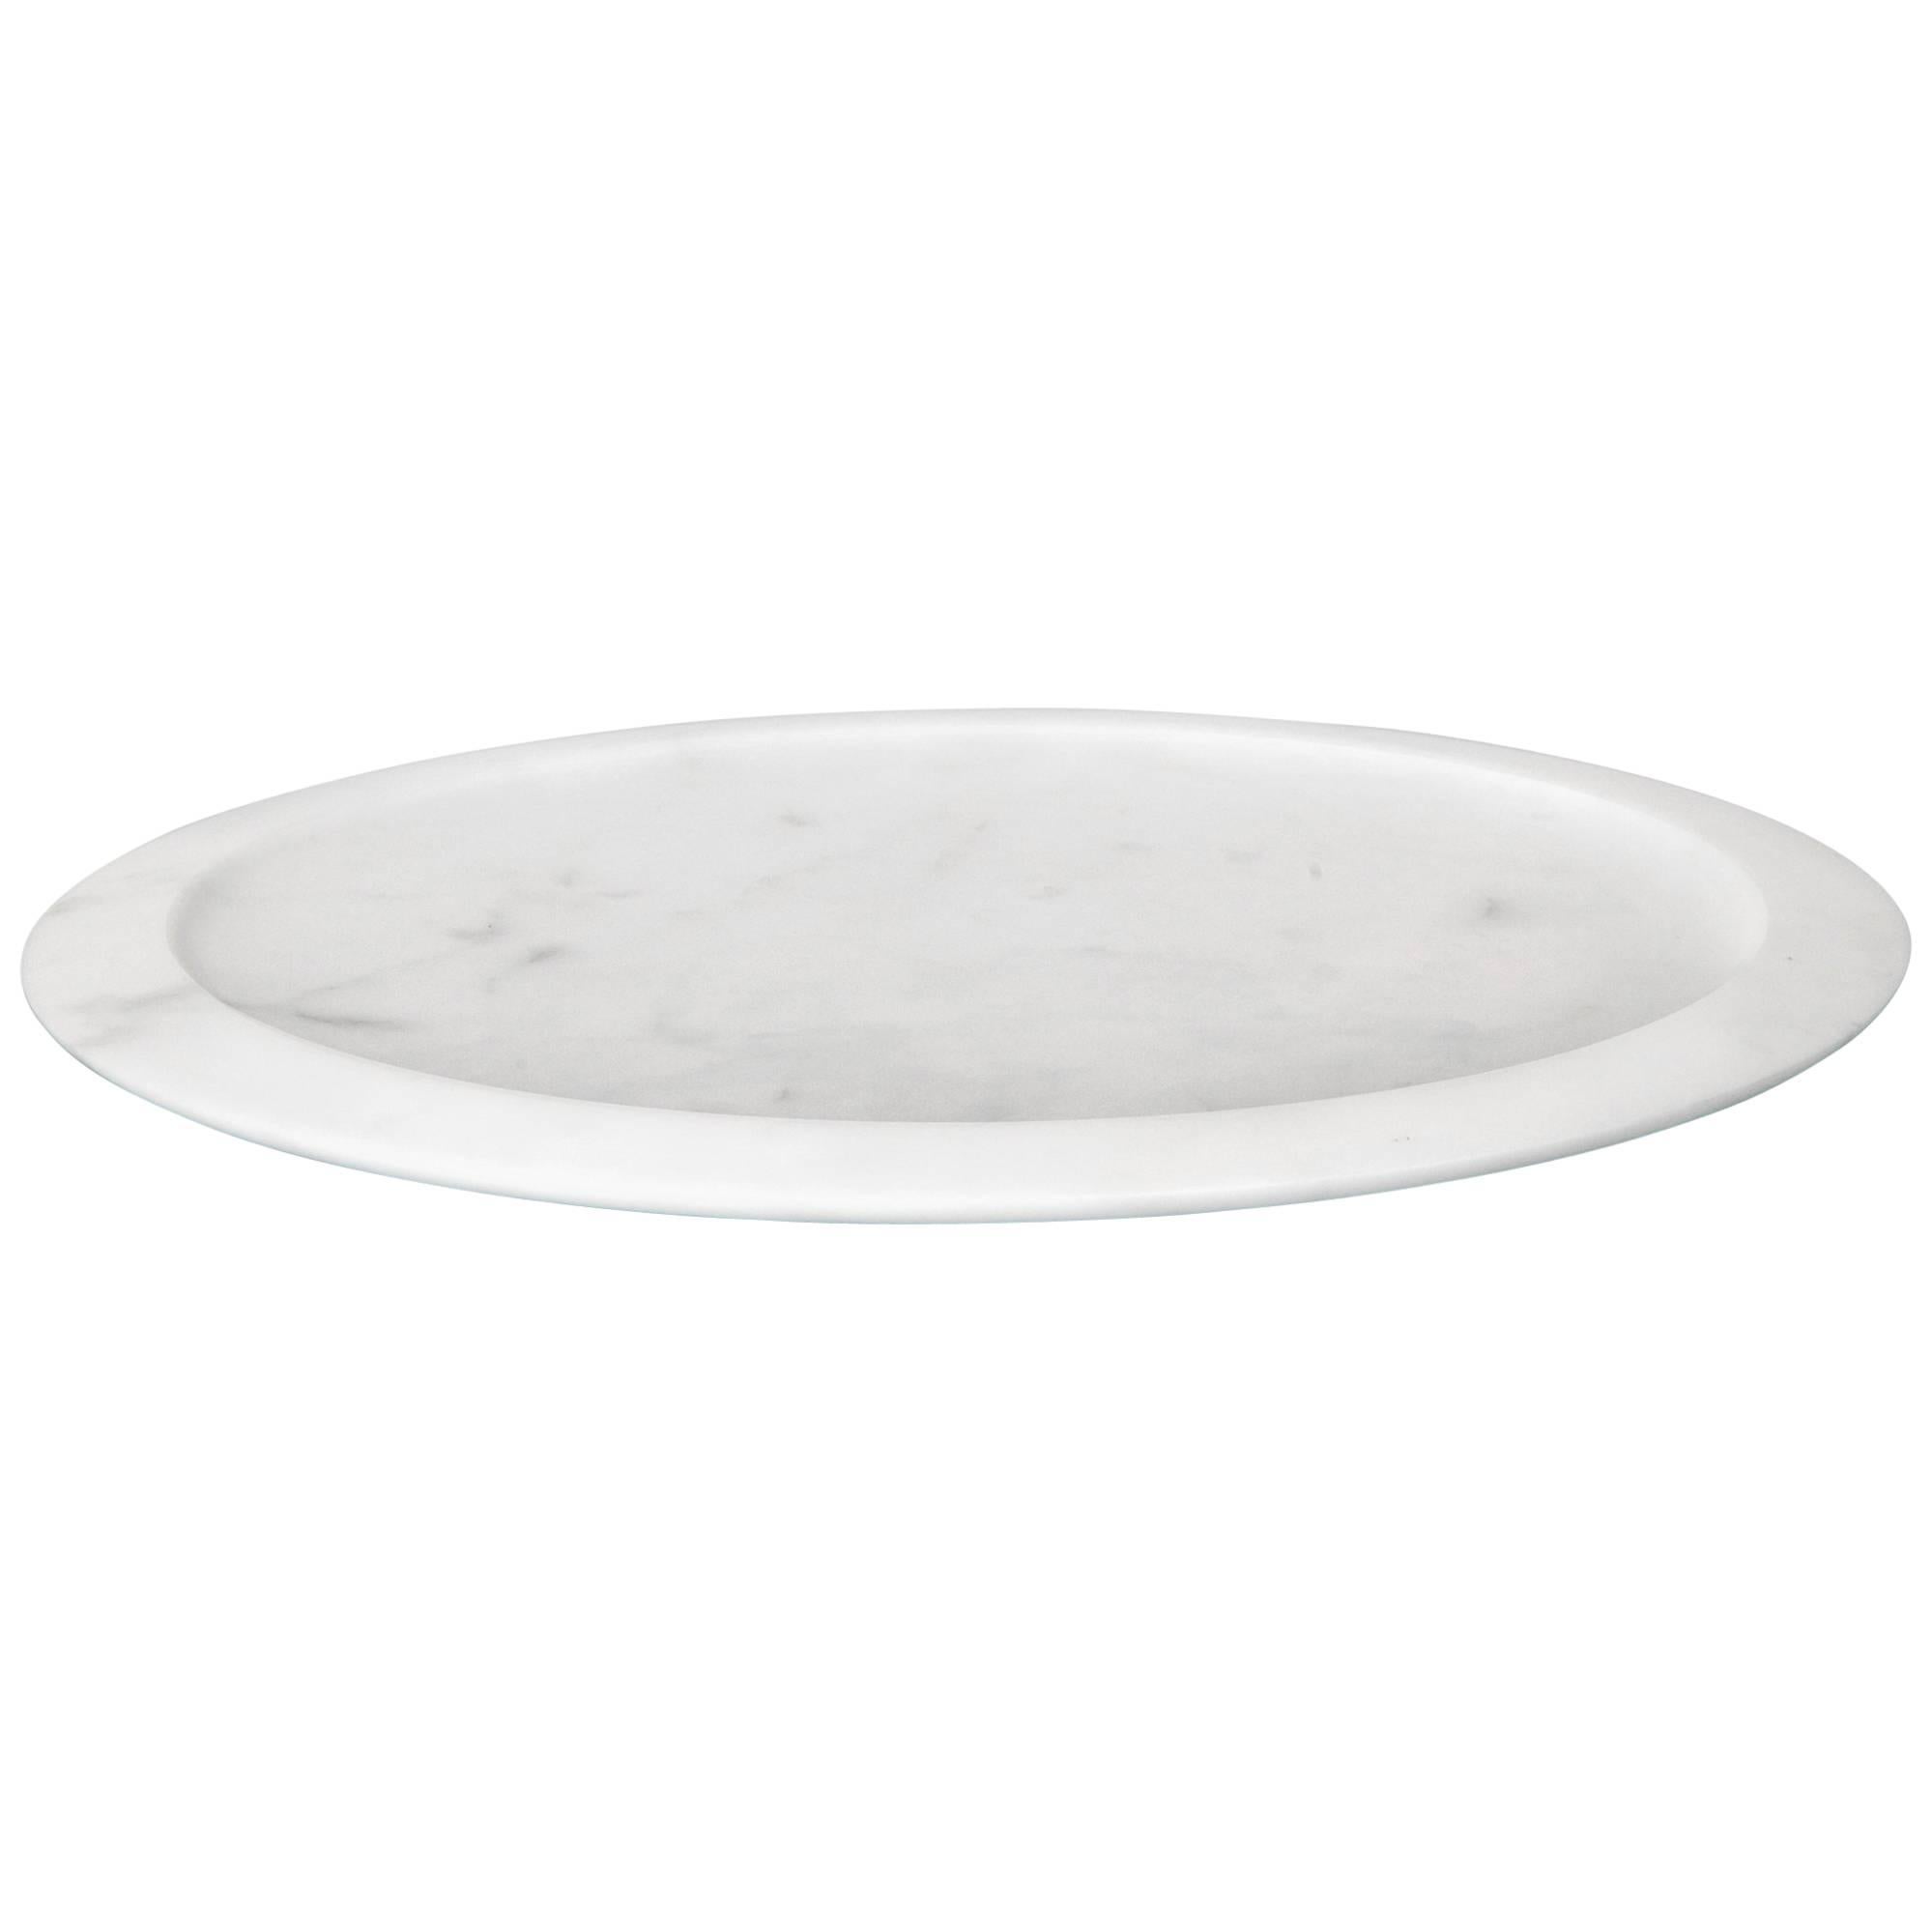 New Modern Tray in White Michelangelo Marble, creator Ivan Colominas